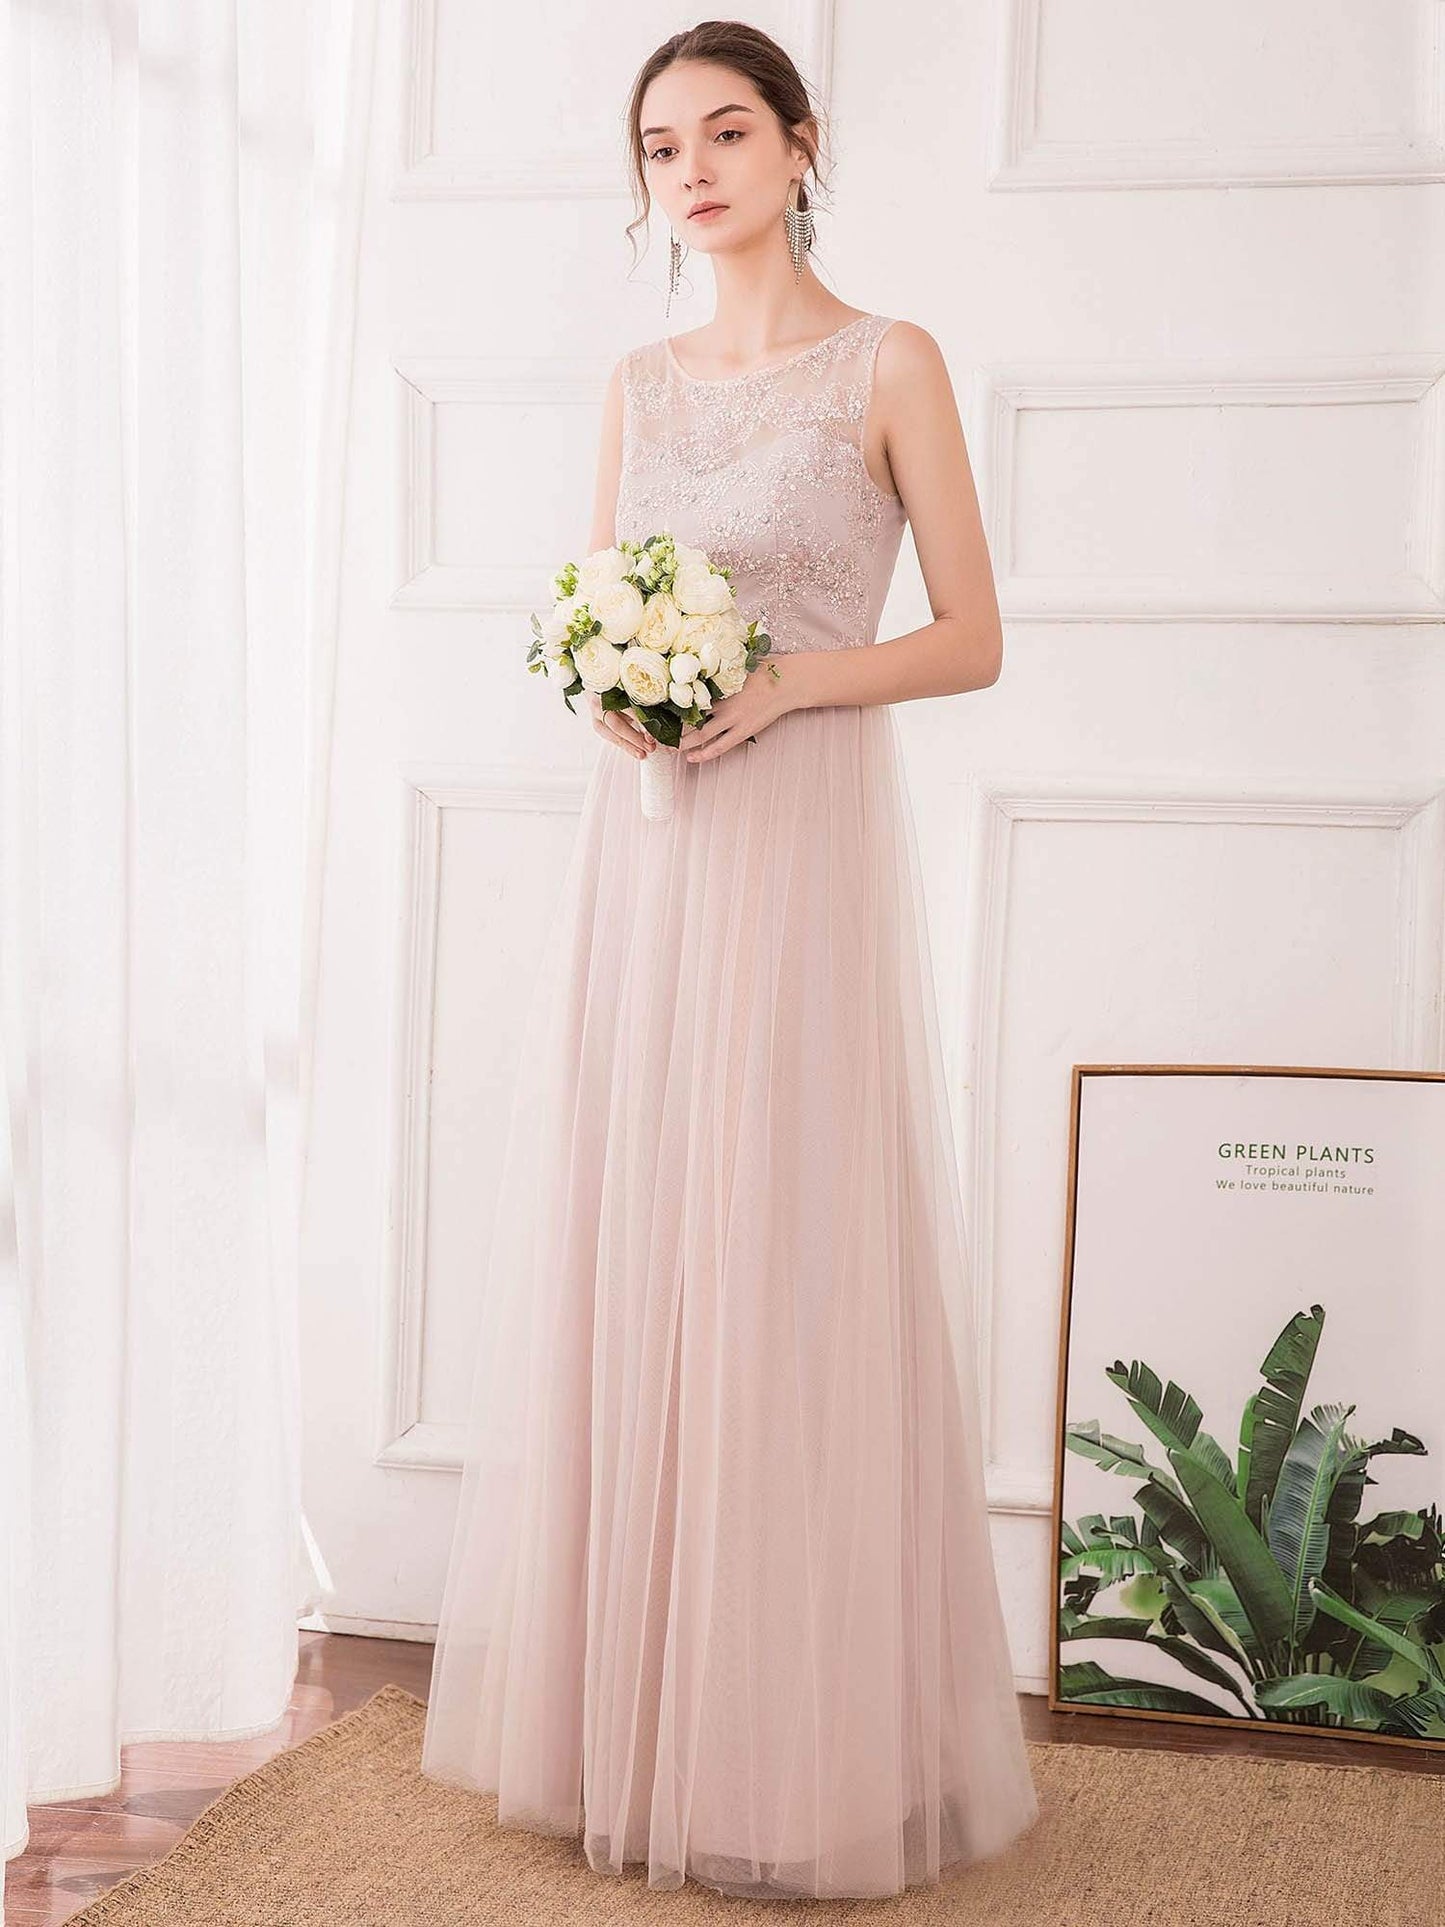 Romantic A-Line O-Neck Embroidery Tulle Bridesmaid Dress EP00740